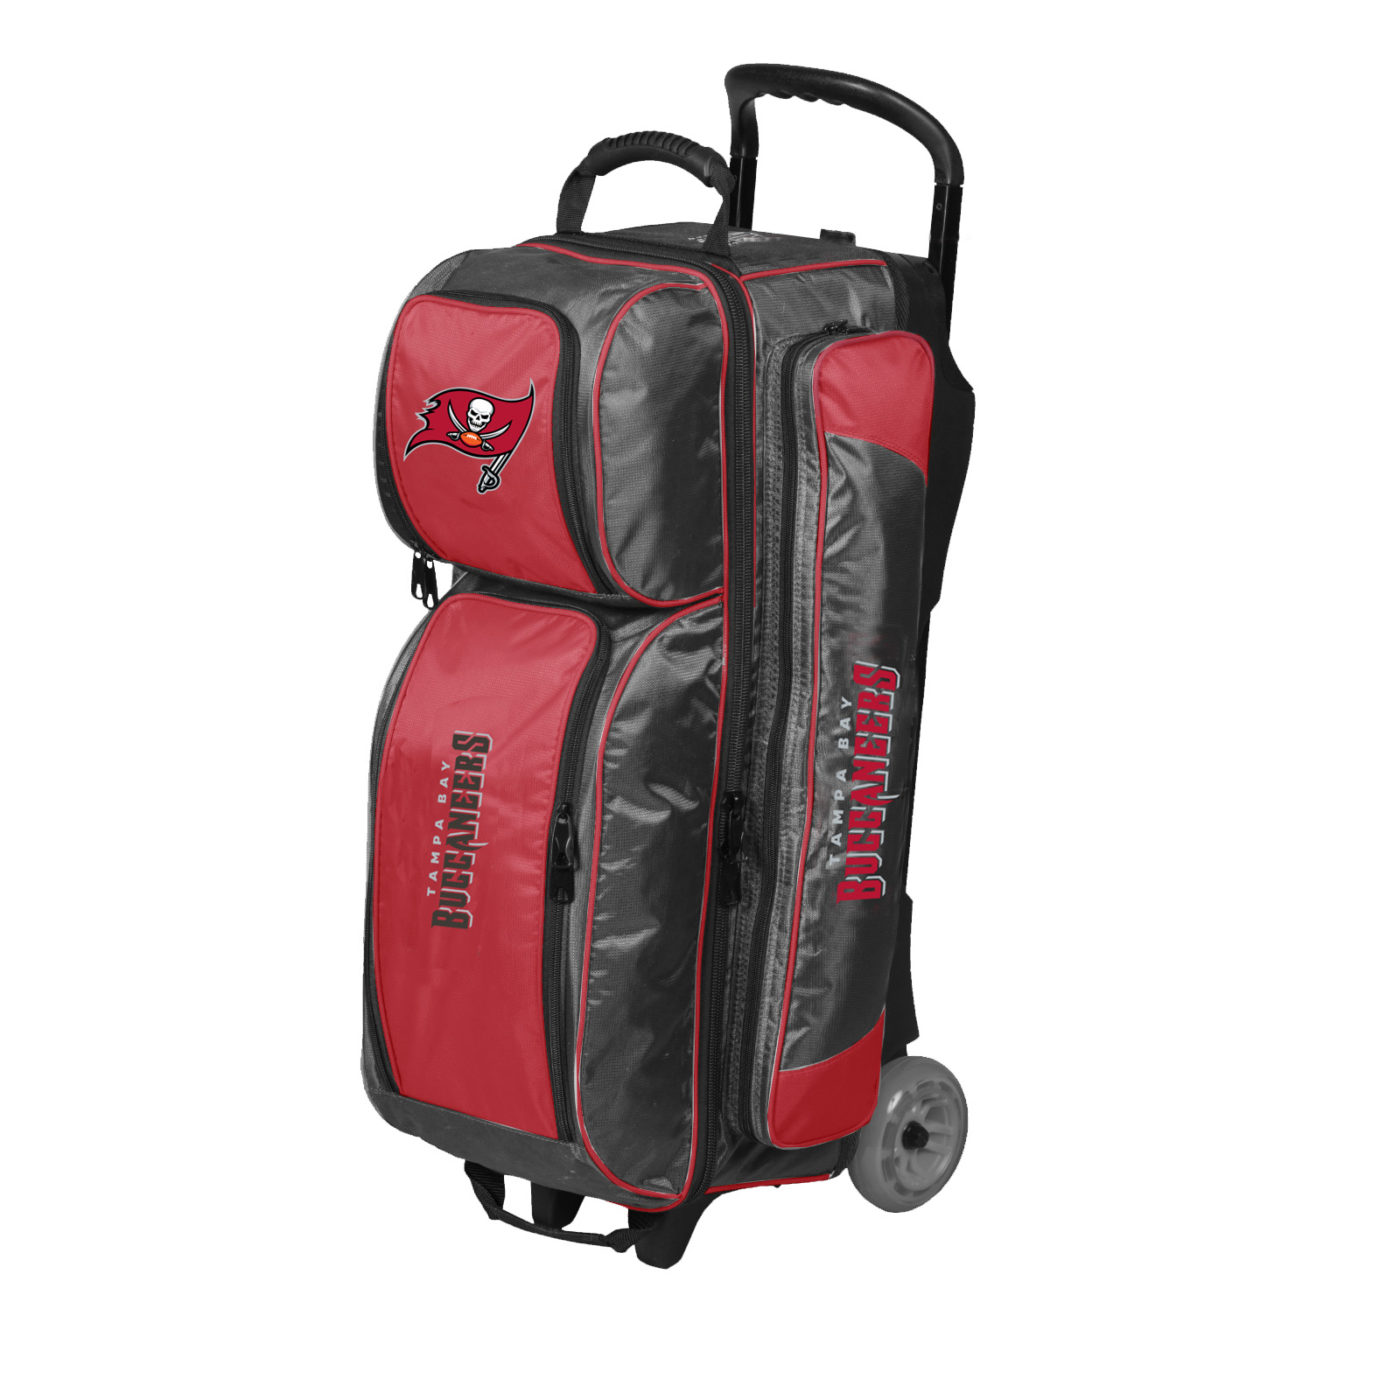 KR Tampa Bay Buccaneers Premium 3 Ball Triple Roller NFL Bowling Bag Questions & Answers